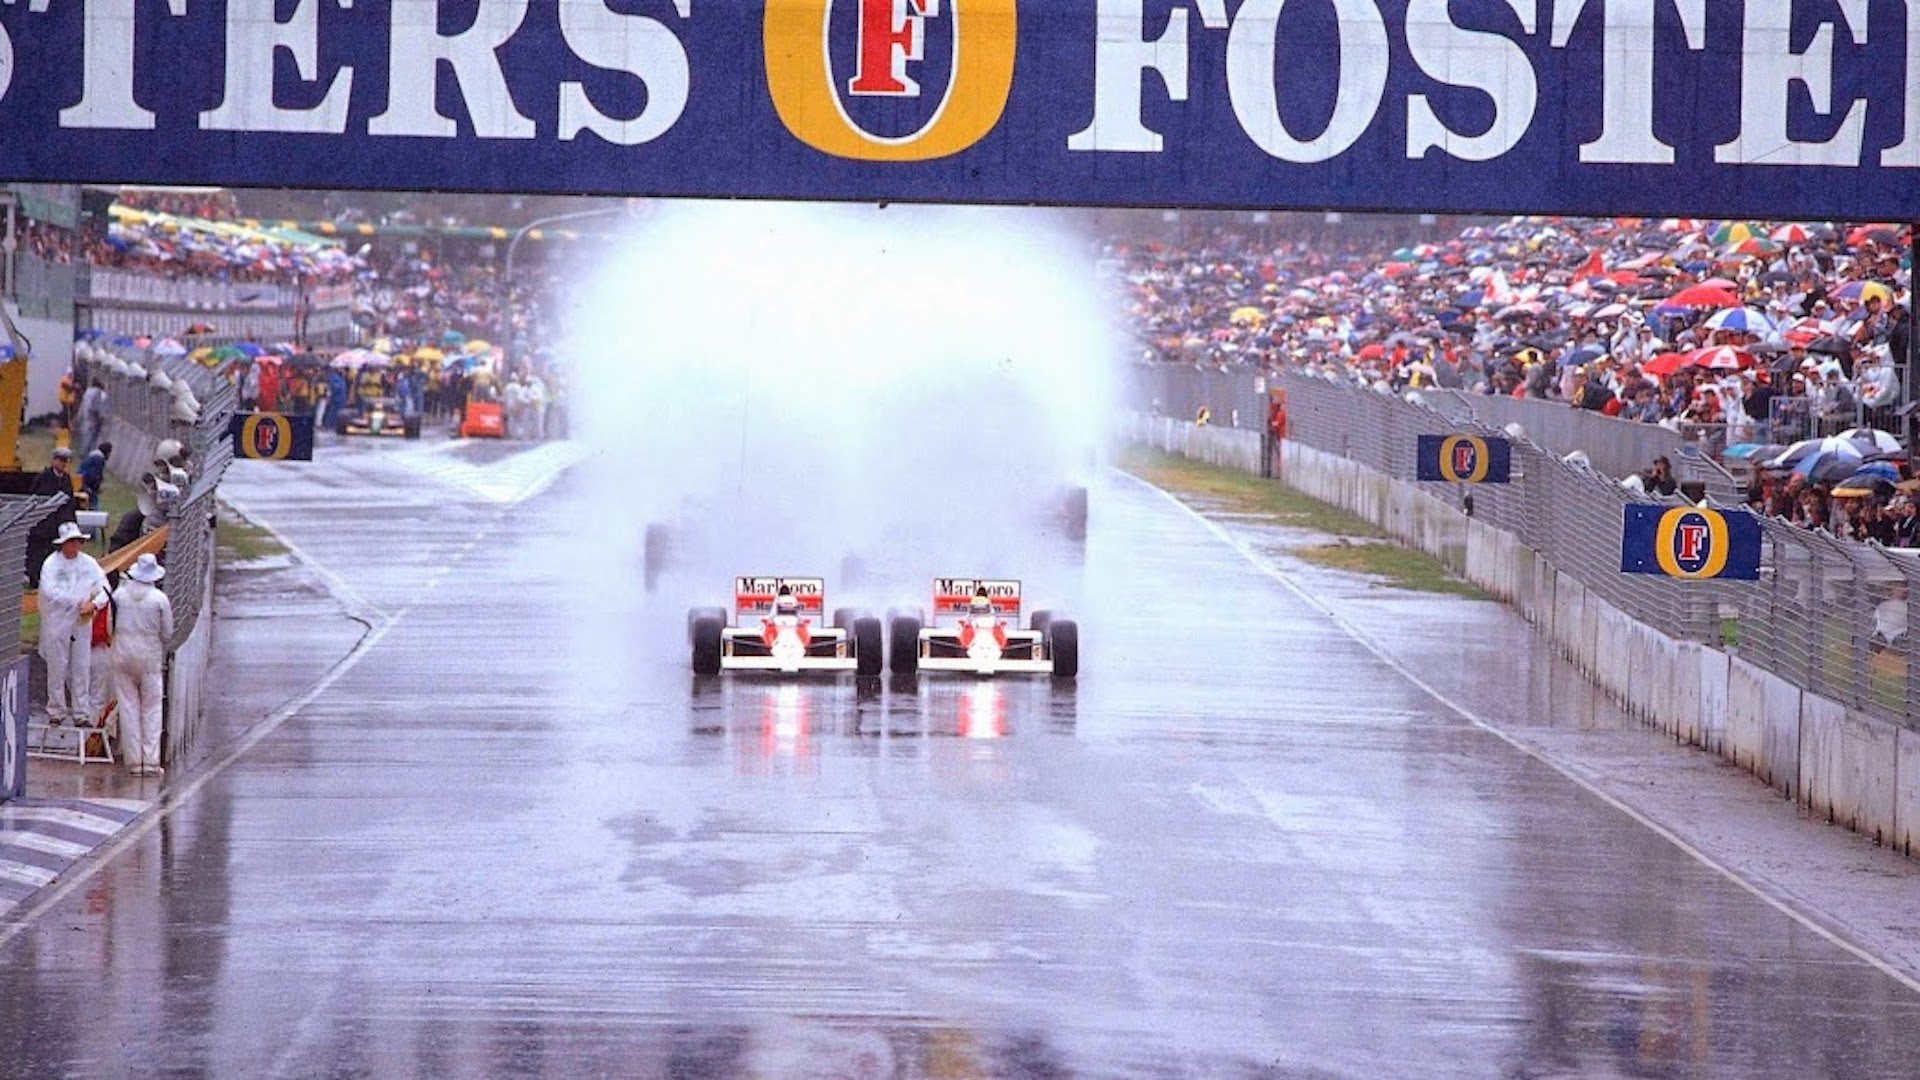 Watch the Chaotic 1991 Formula 1 Australian Grand Prix at Adelaide